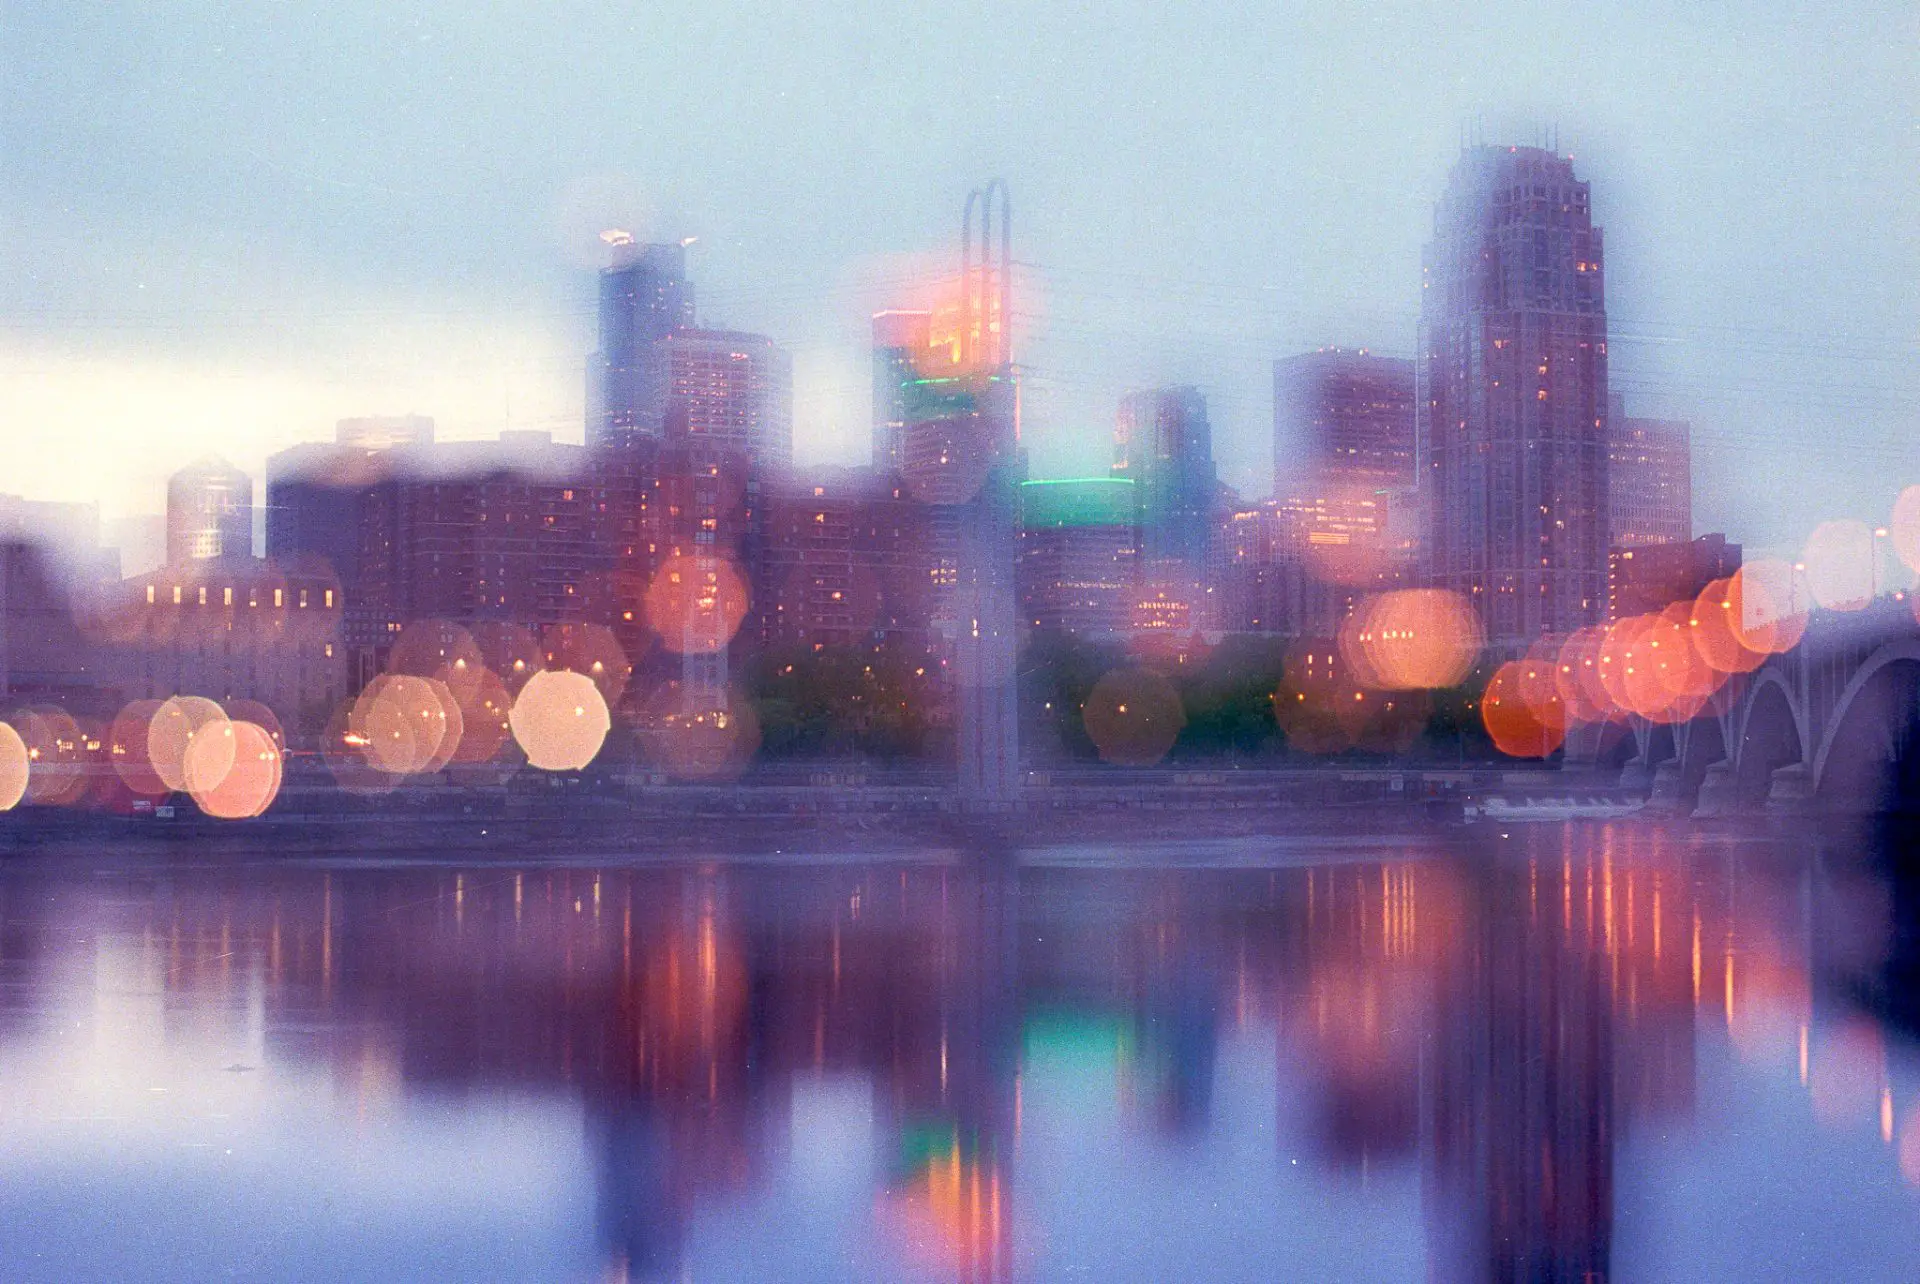 Contax S2, Carl Zeiss 50mm f1.4, Kodak Portra 800  / long exposure combined with a double exposure